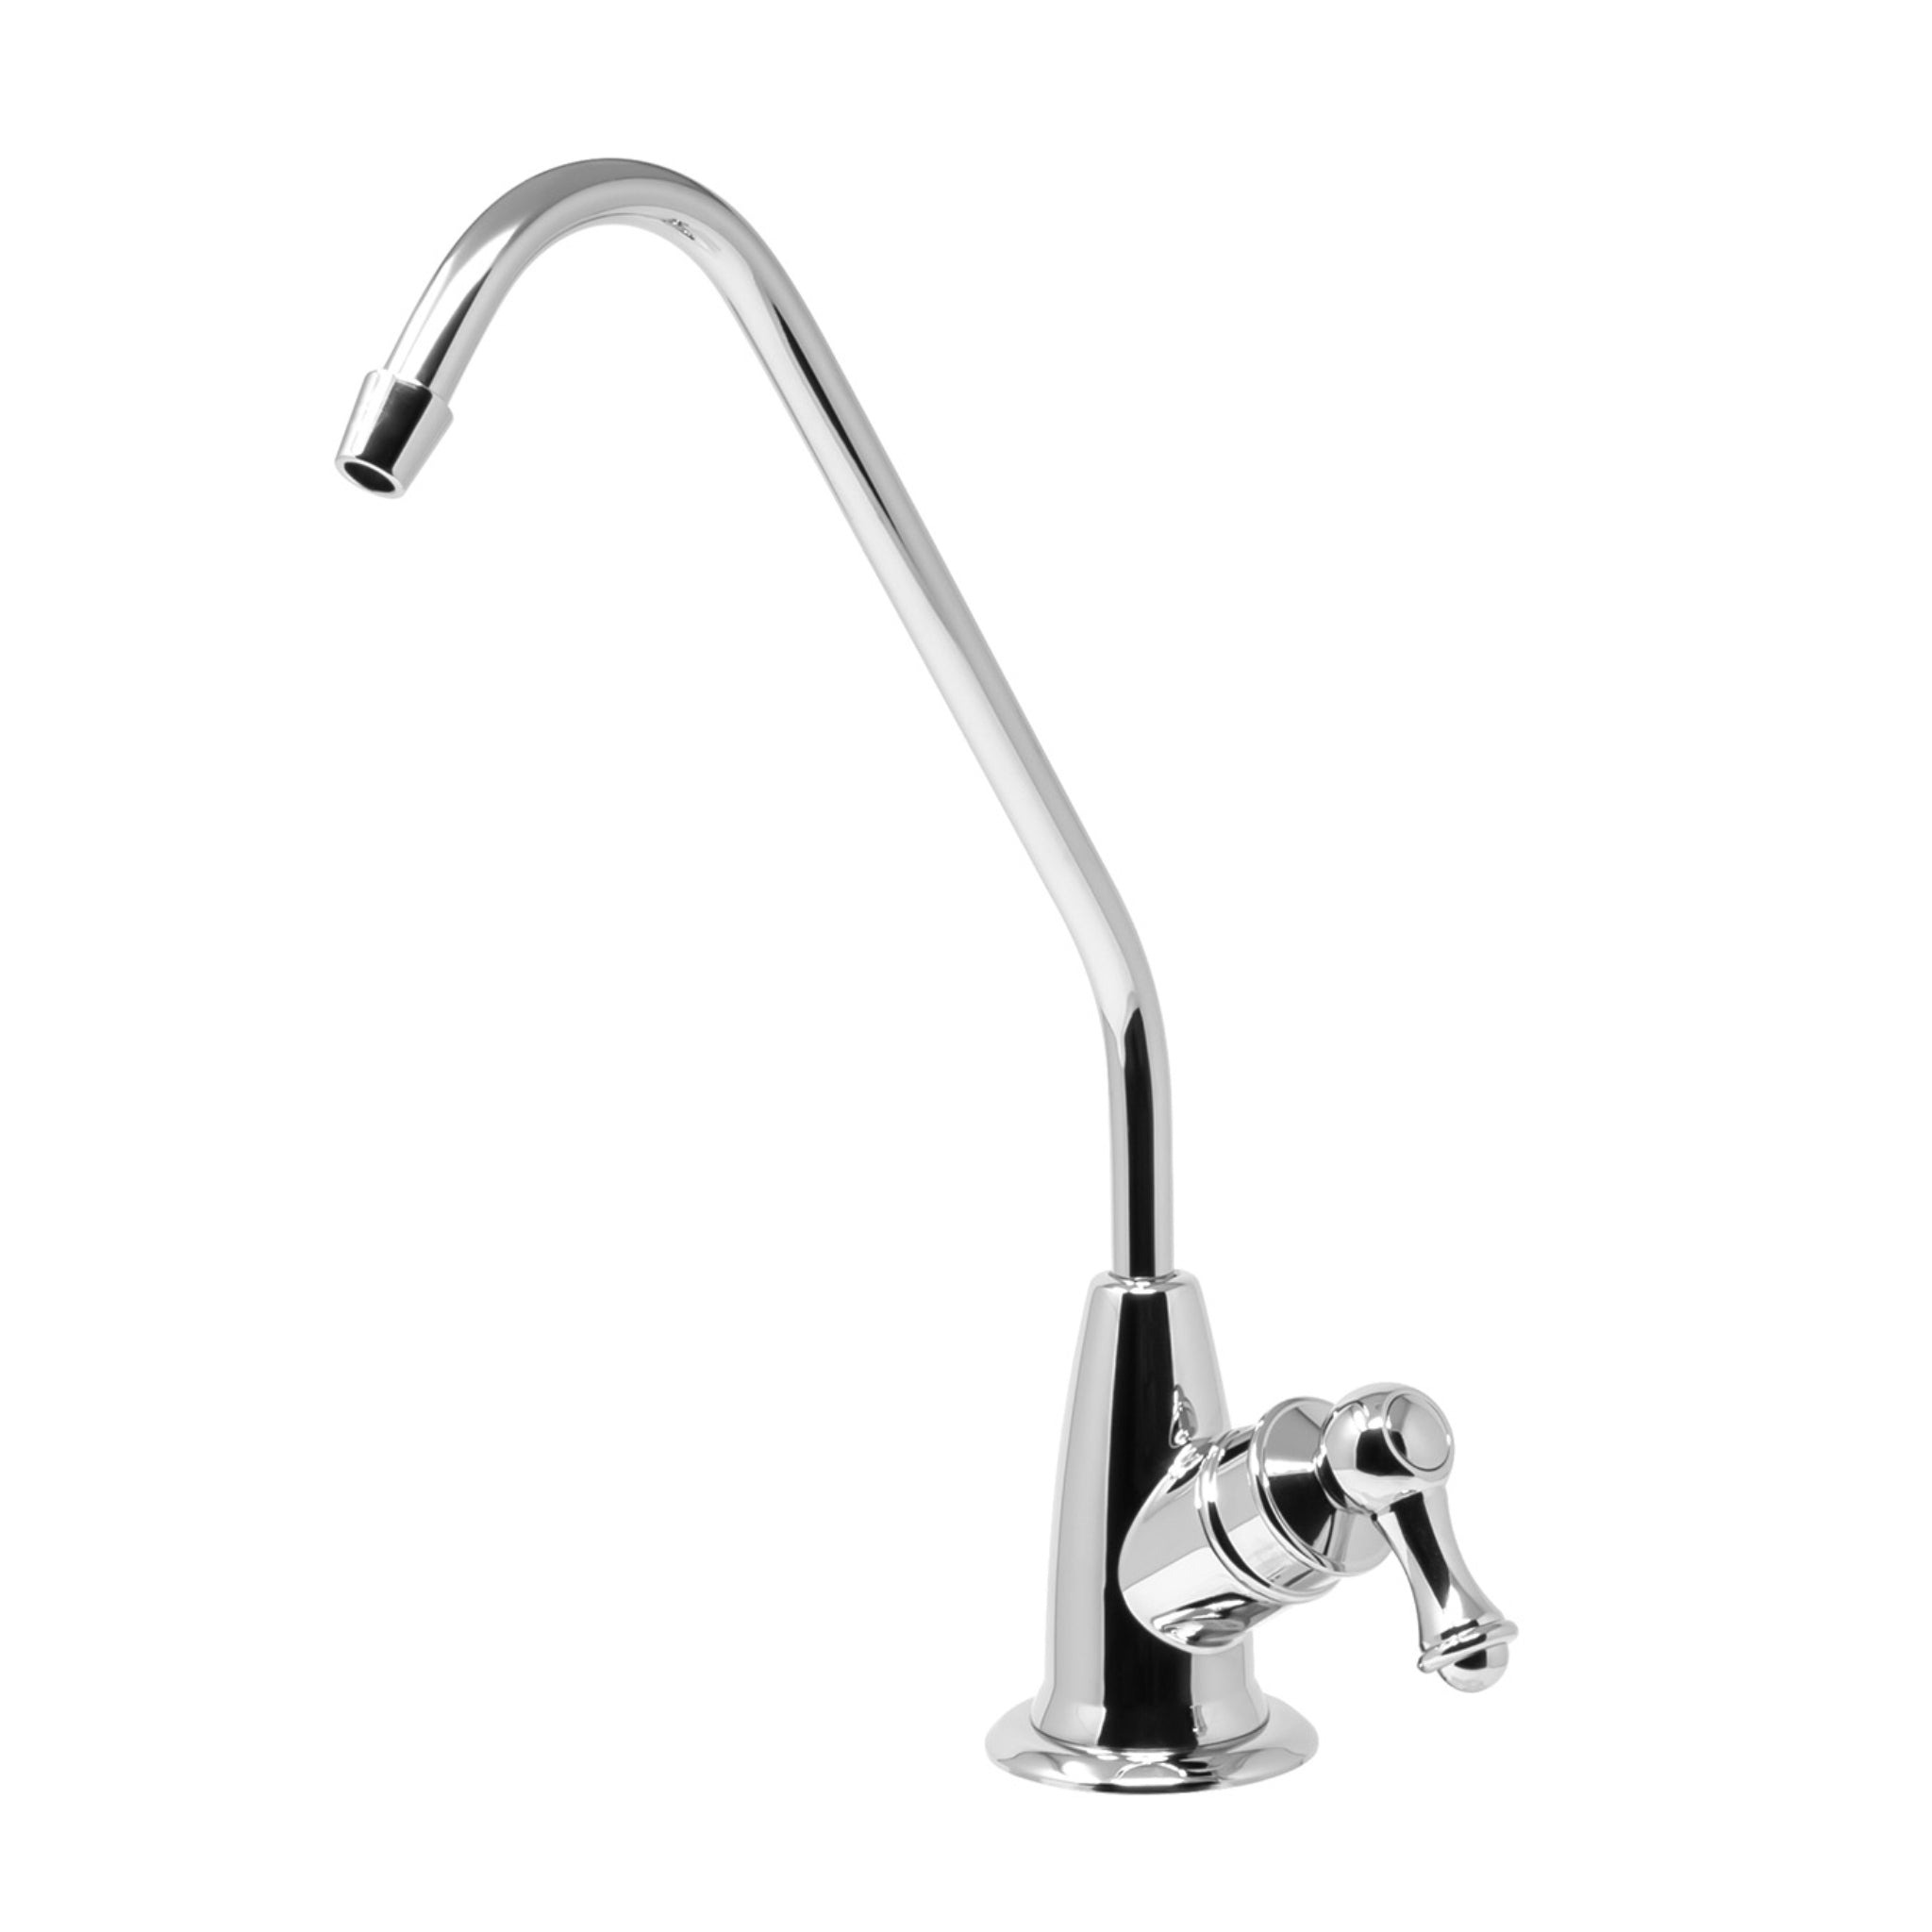 A metpure long reach chrome ro water filtration wholesale faucet.